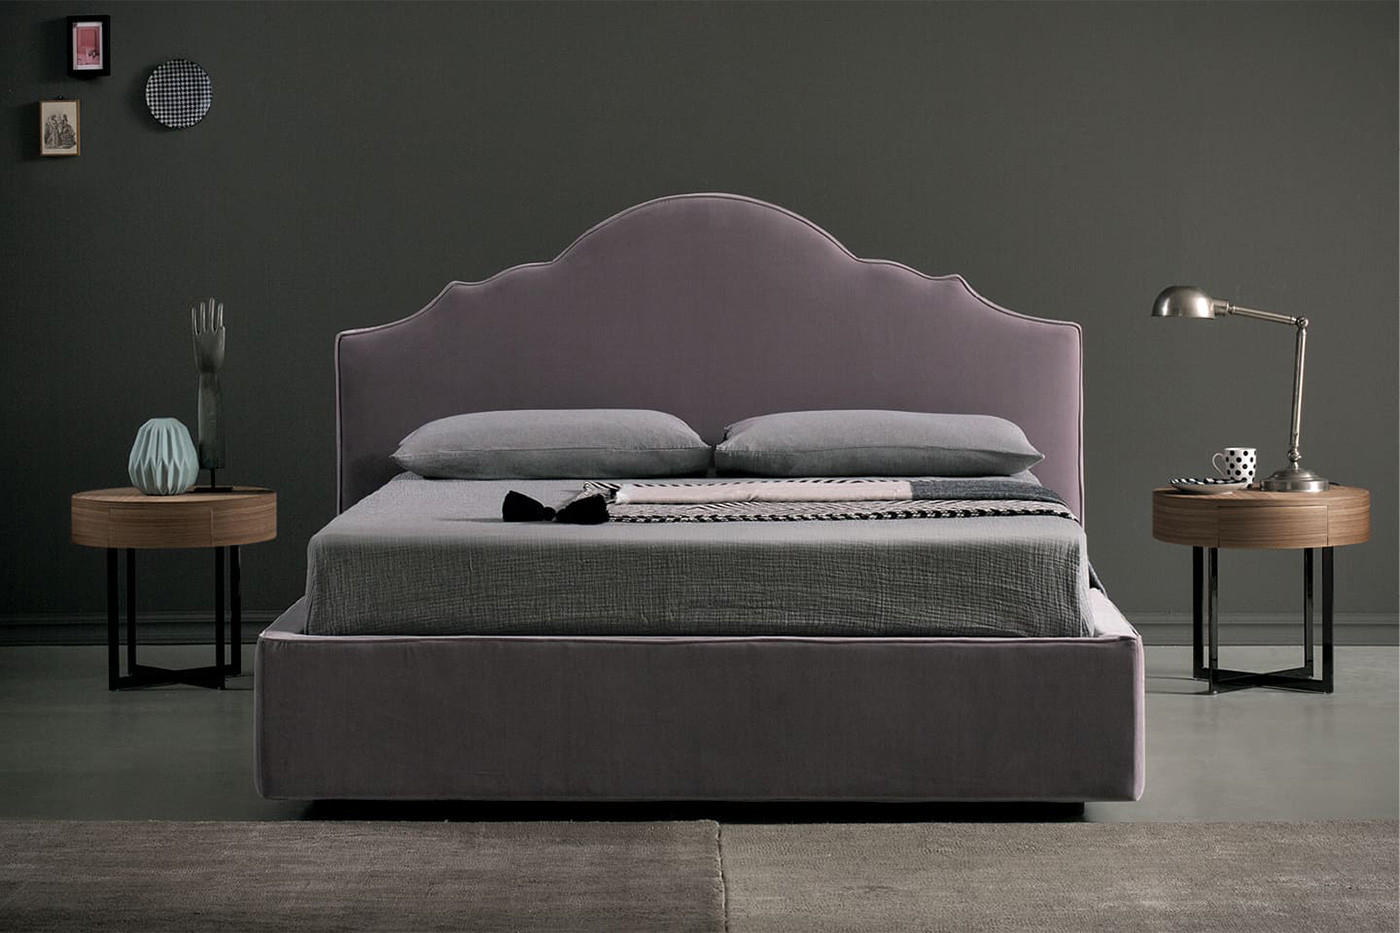 Upholstered scalloped headboard bed, available as a king size and super king size